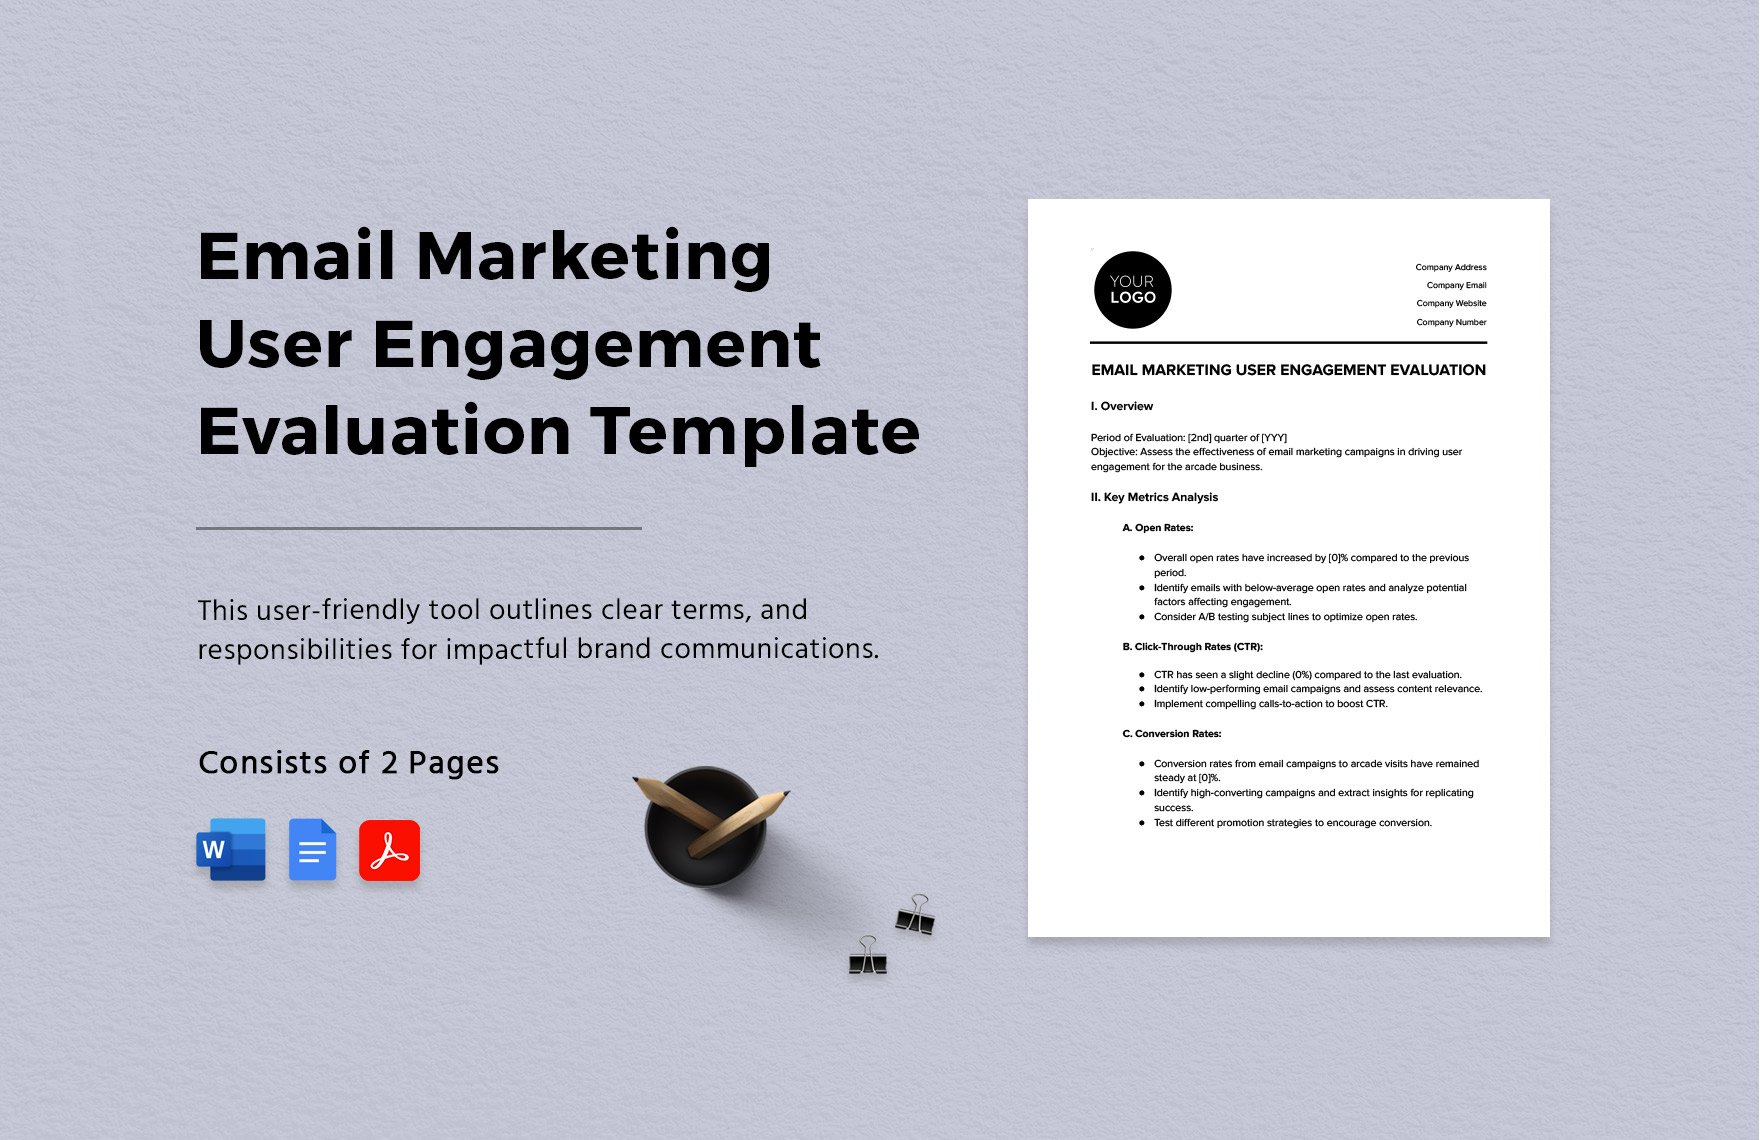 Email Marketing User Engagement Evaluation Template